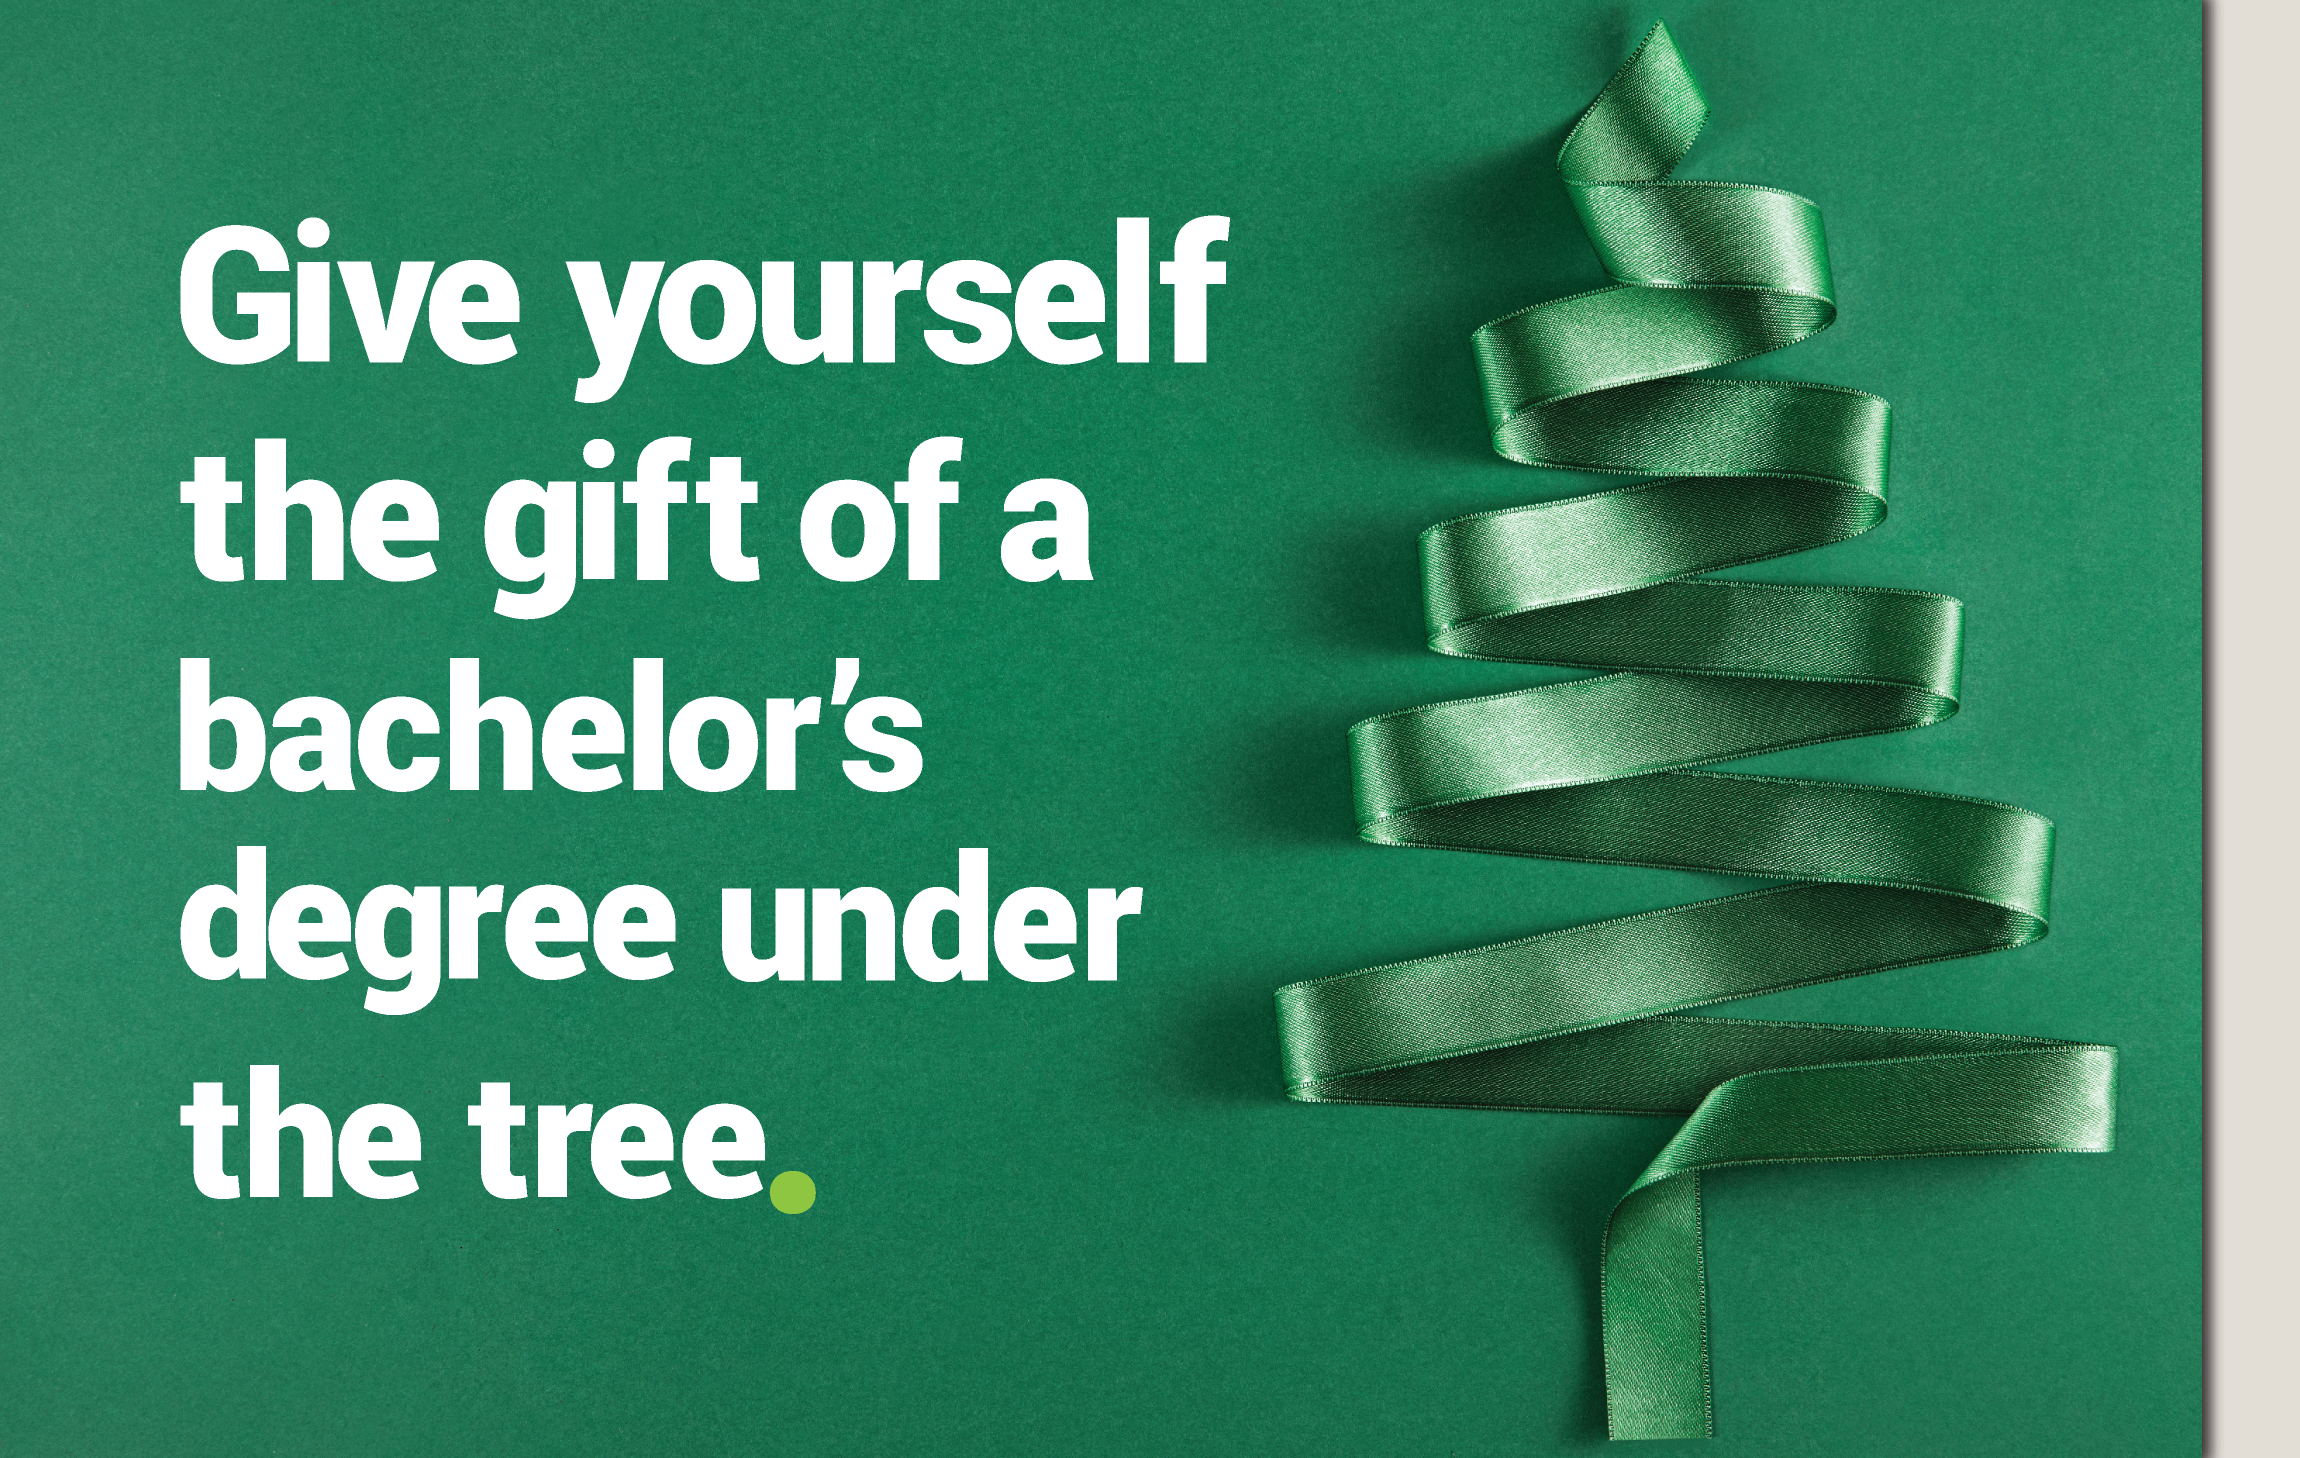 Give yourself the gift of a bachelor's degree under the tree